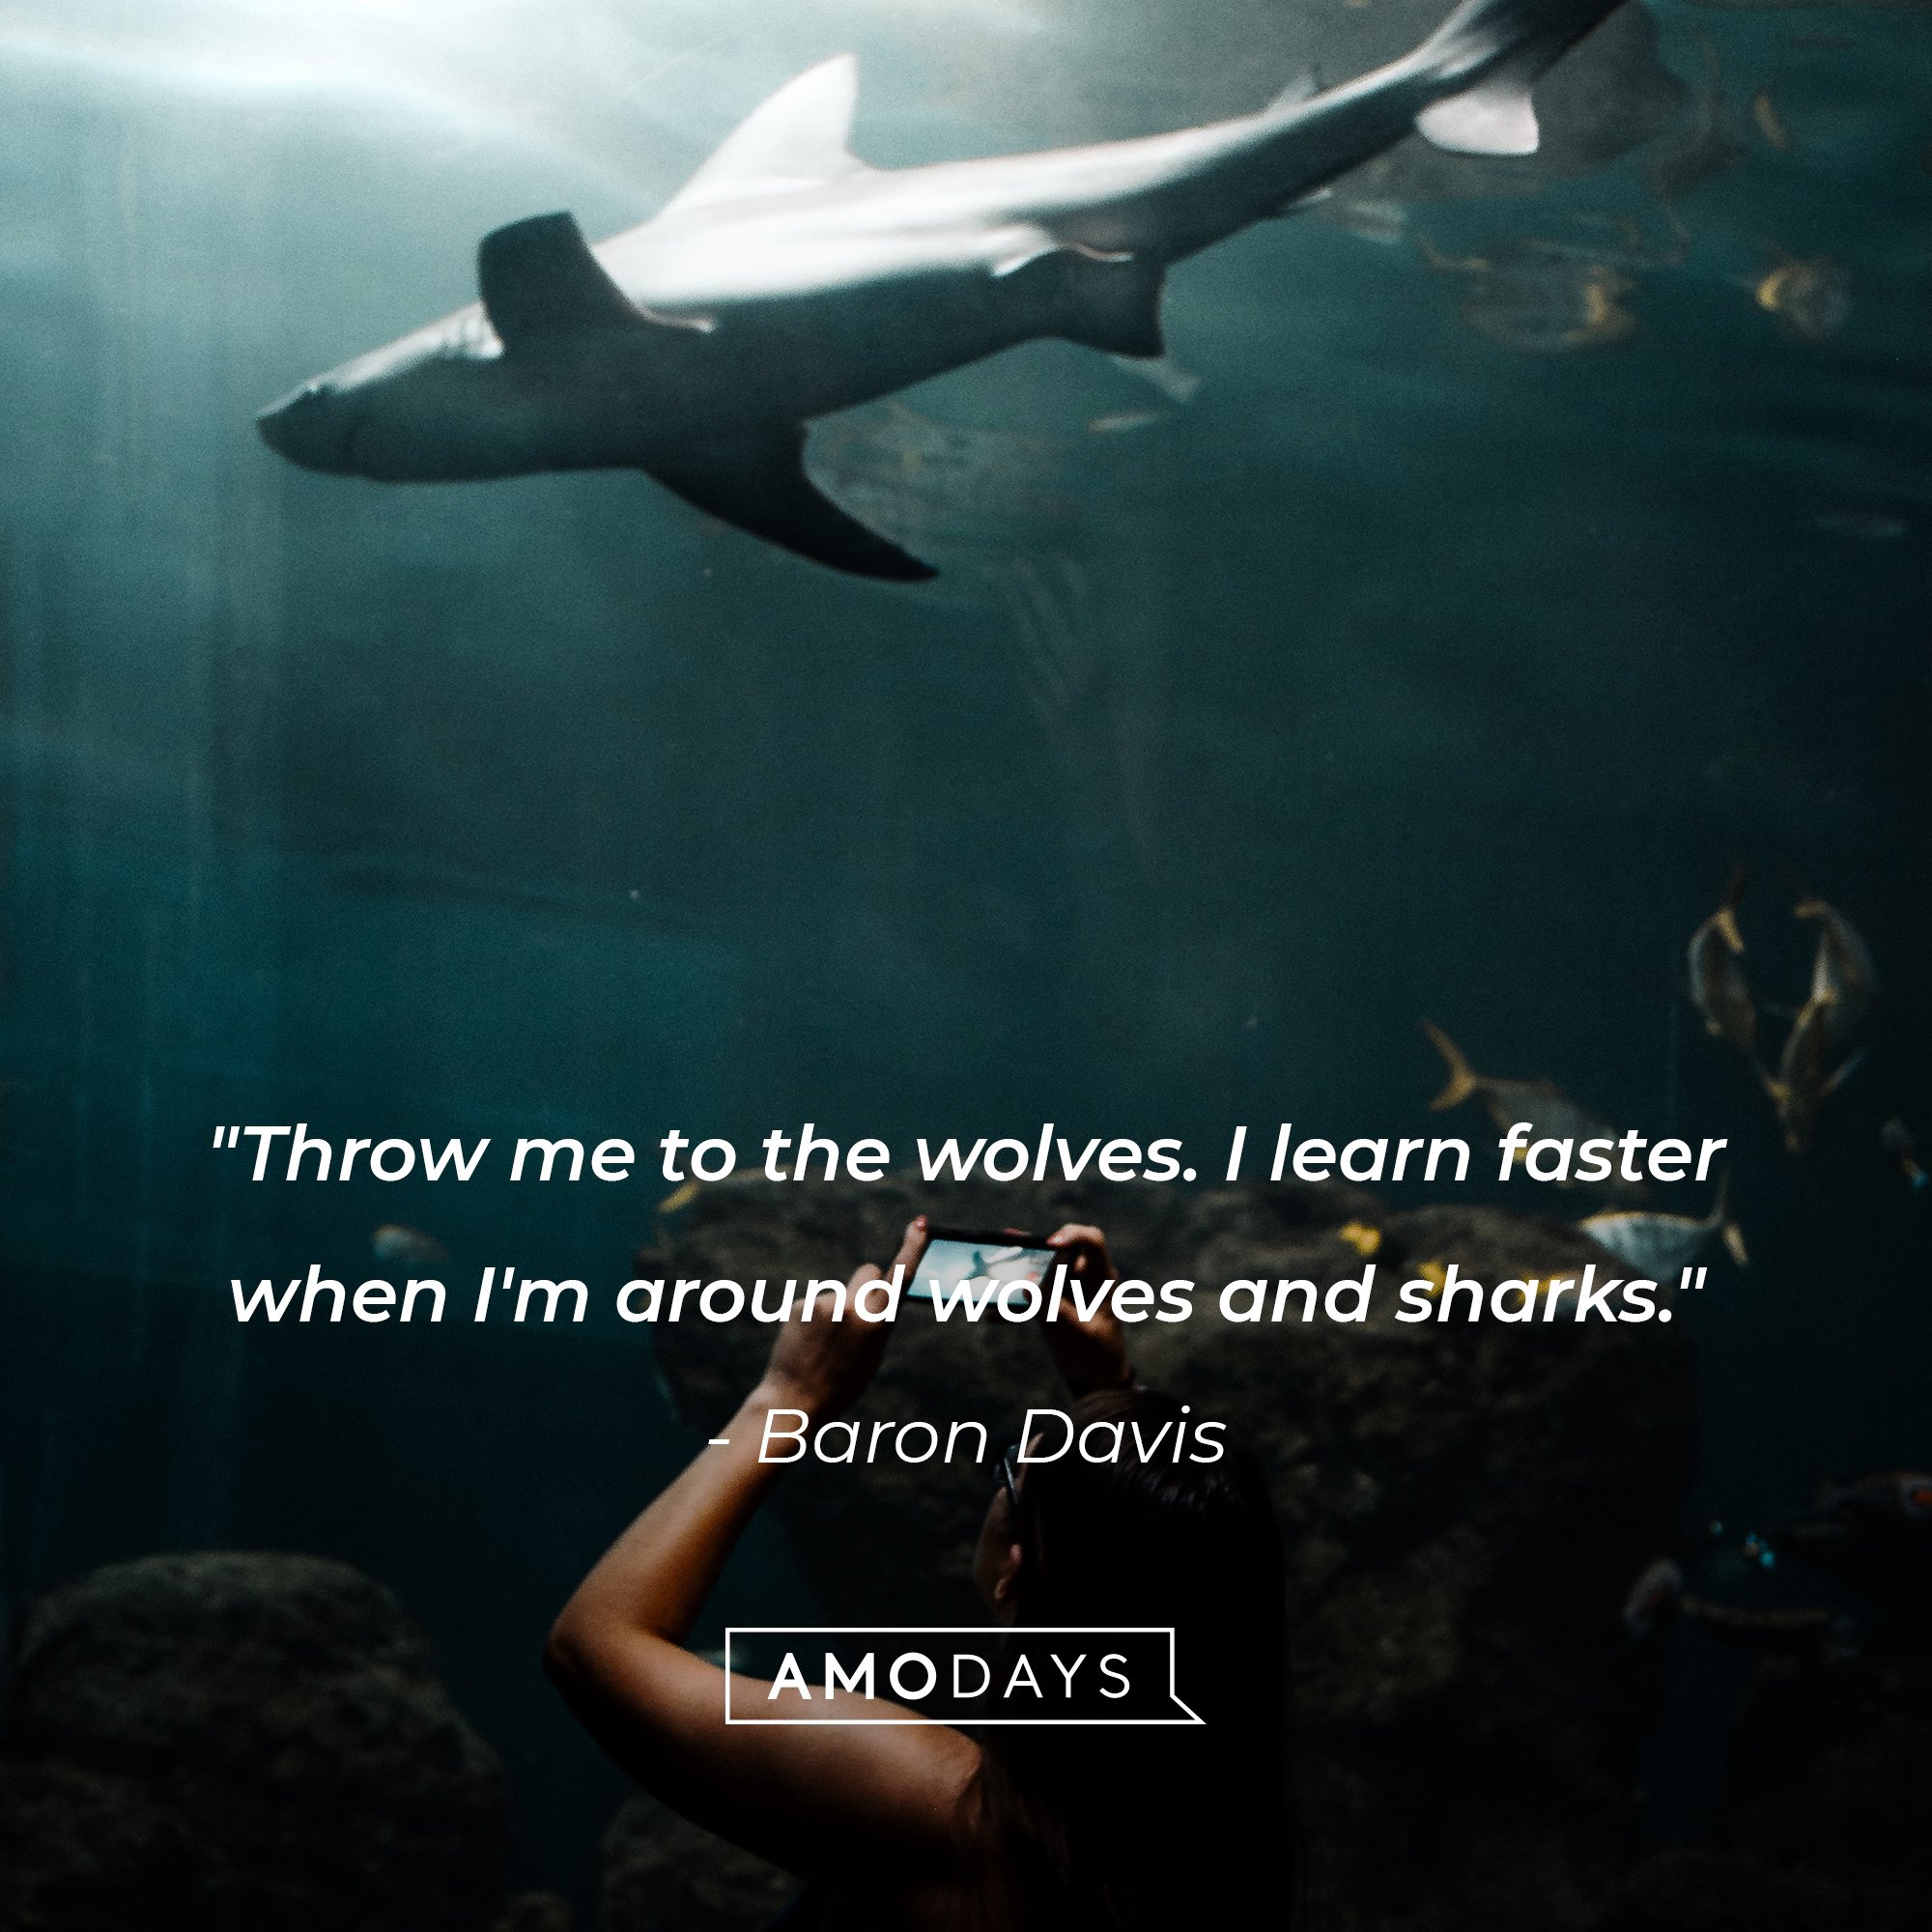 Baron Davis's quote: "Throw me to the wolves. I learn faster when I'm around wolves and sharks." | Image: AmoDays